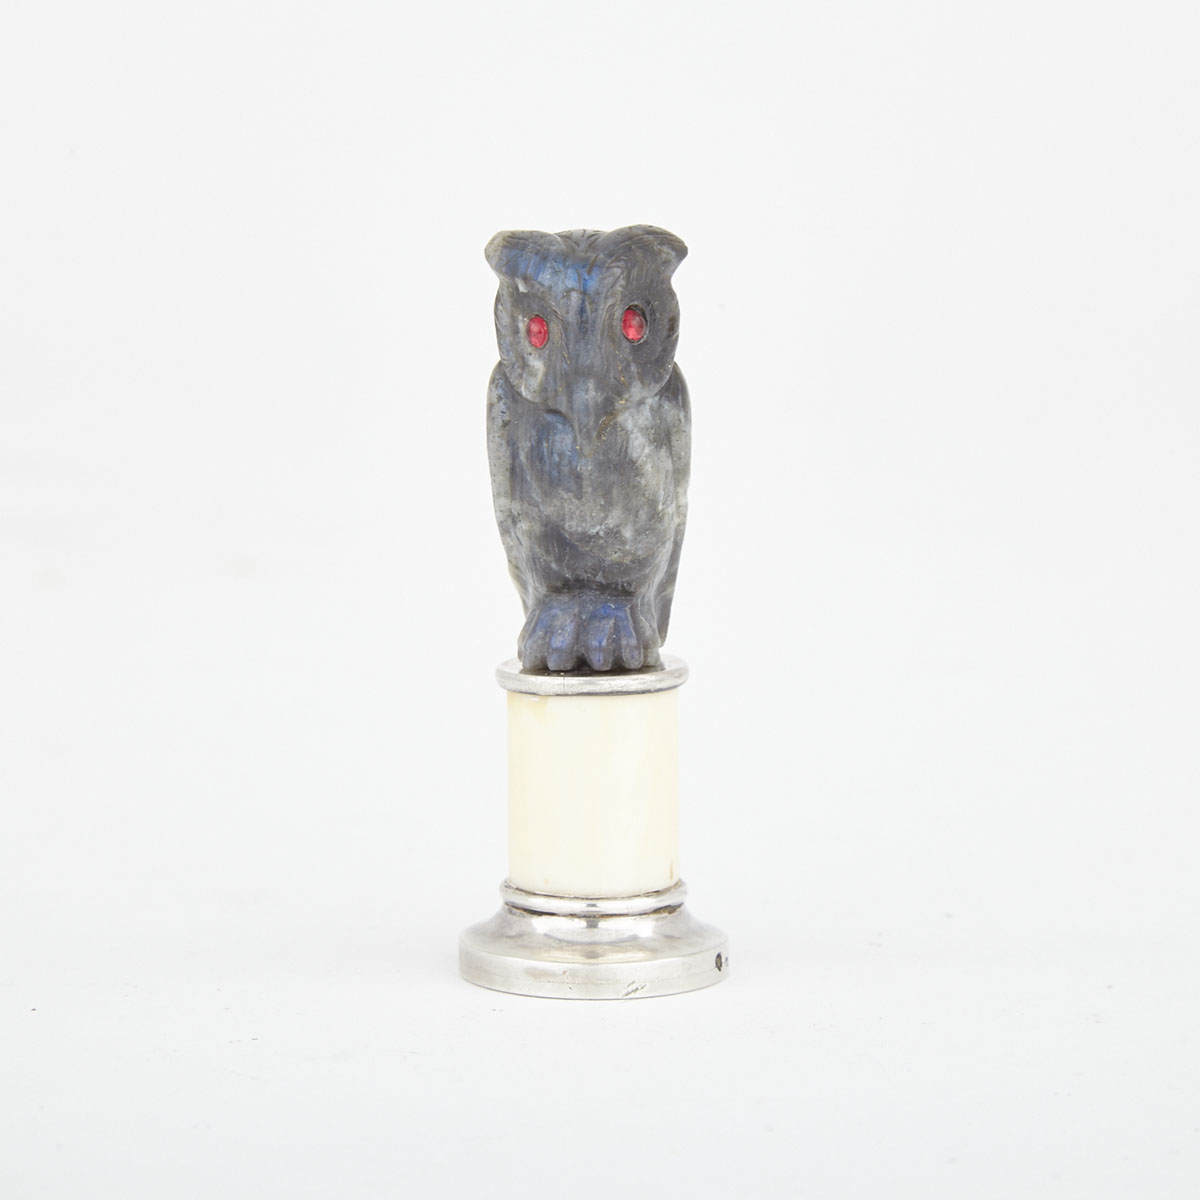 Austrian Silver Mounted Carved Labradorite and Ivory Owl Form Desk Seal, early 20th century